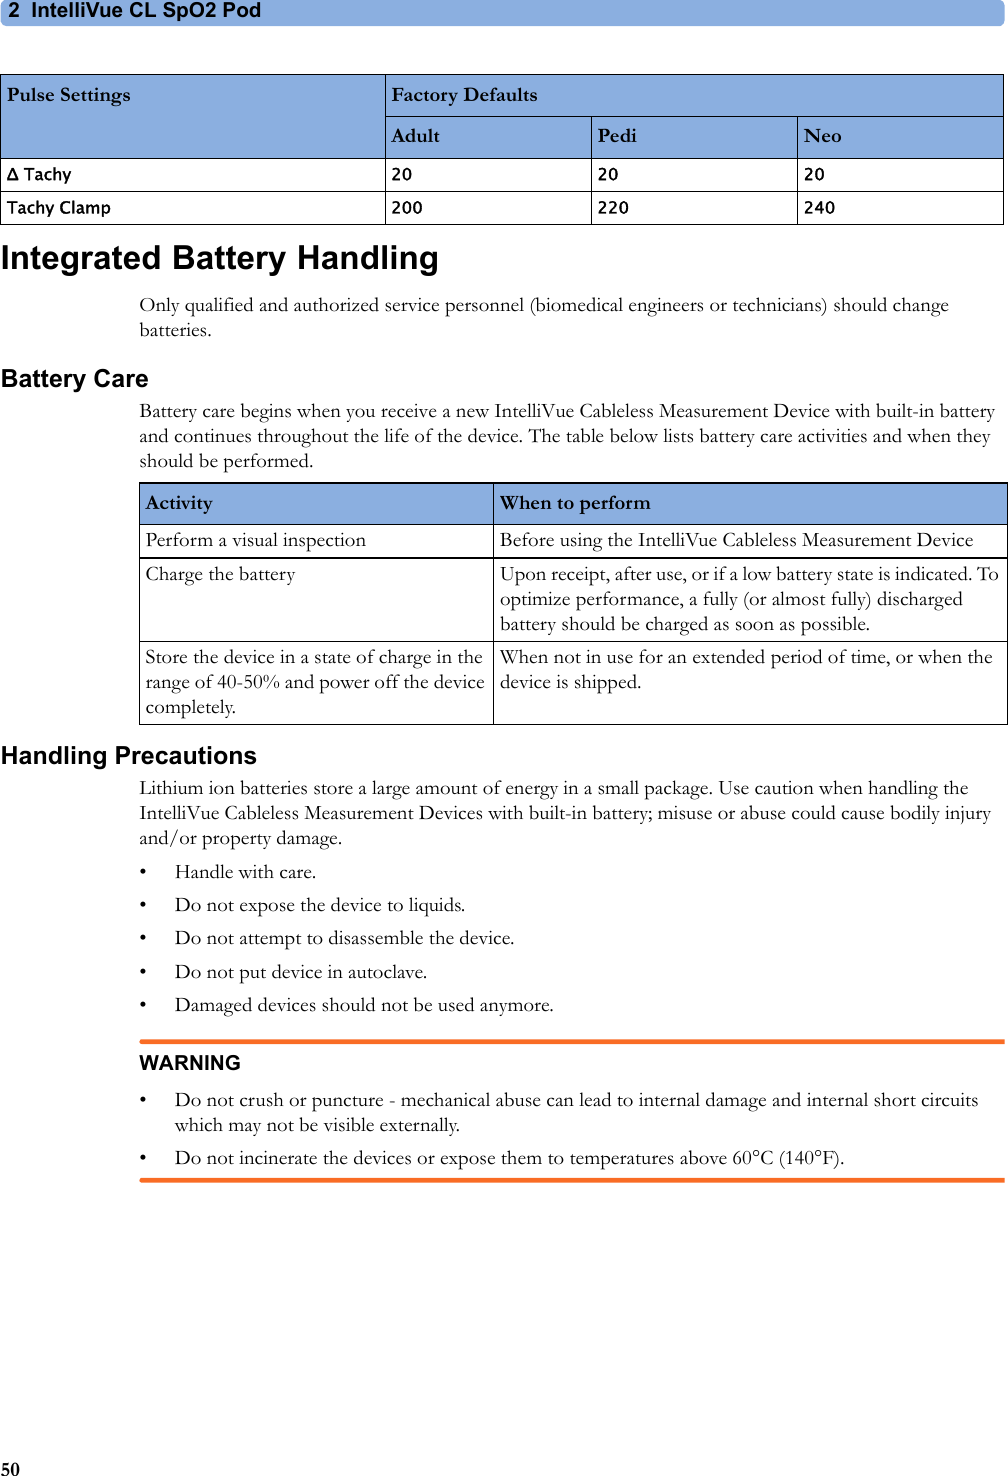 2 IntelliVue CL SpO2 Pod50Integrated Battery HandlingOnly qualified and authorized service personnel (biomedical engineers or technicians) should change batteries.Battery CareBattery care begins when you receive a new IntelliVue Cableless Measurement Device with built-in battery and continues throughout the life of the device. The table below lists battery care activities and when they should be performed.Handling PrecautionsLithium ion batteries store a large amount of energy in a small package. Use caution when handling the IntelliVue Cableless Measurement Devices with built-in battery; misuse or abuse could cause bodily injury and/or property damage.• Handle with care.• Do not expose the device to liquids.• Do not attempt to disassemble the device.• Do not put device in autoclave.• Damaged devices should not be used anymore.WARNING• Do not crush or puncture - mechanical abuse can lead to internal damage and internal short circuits which may not be visible externally.• Do not incinerate the devices or expose them to temperatures above 60°C (140°F).Δ Tachy 202020Tachy Clamp 200 220 240Pulse Settings Factory DefaultsAdult Pedi NeoActivity When to performPerform a visual inspection Before using the IntelliVue Cableless Measurement DeviceCharge the battery Upon receipt, after use, or if a low battery state is indicated. To optimize performance, a fully (or almost fully) discharged battery should be charged as soon as possible.Store the device in a state of charge in the range of 40-50% and power off the device completely.When not in use for an extended period of time, or when the device is shipped. 